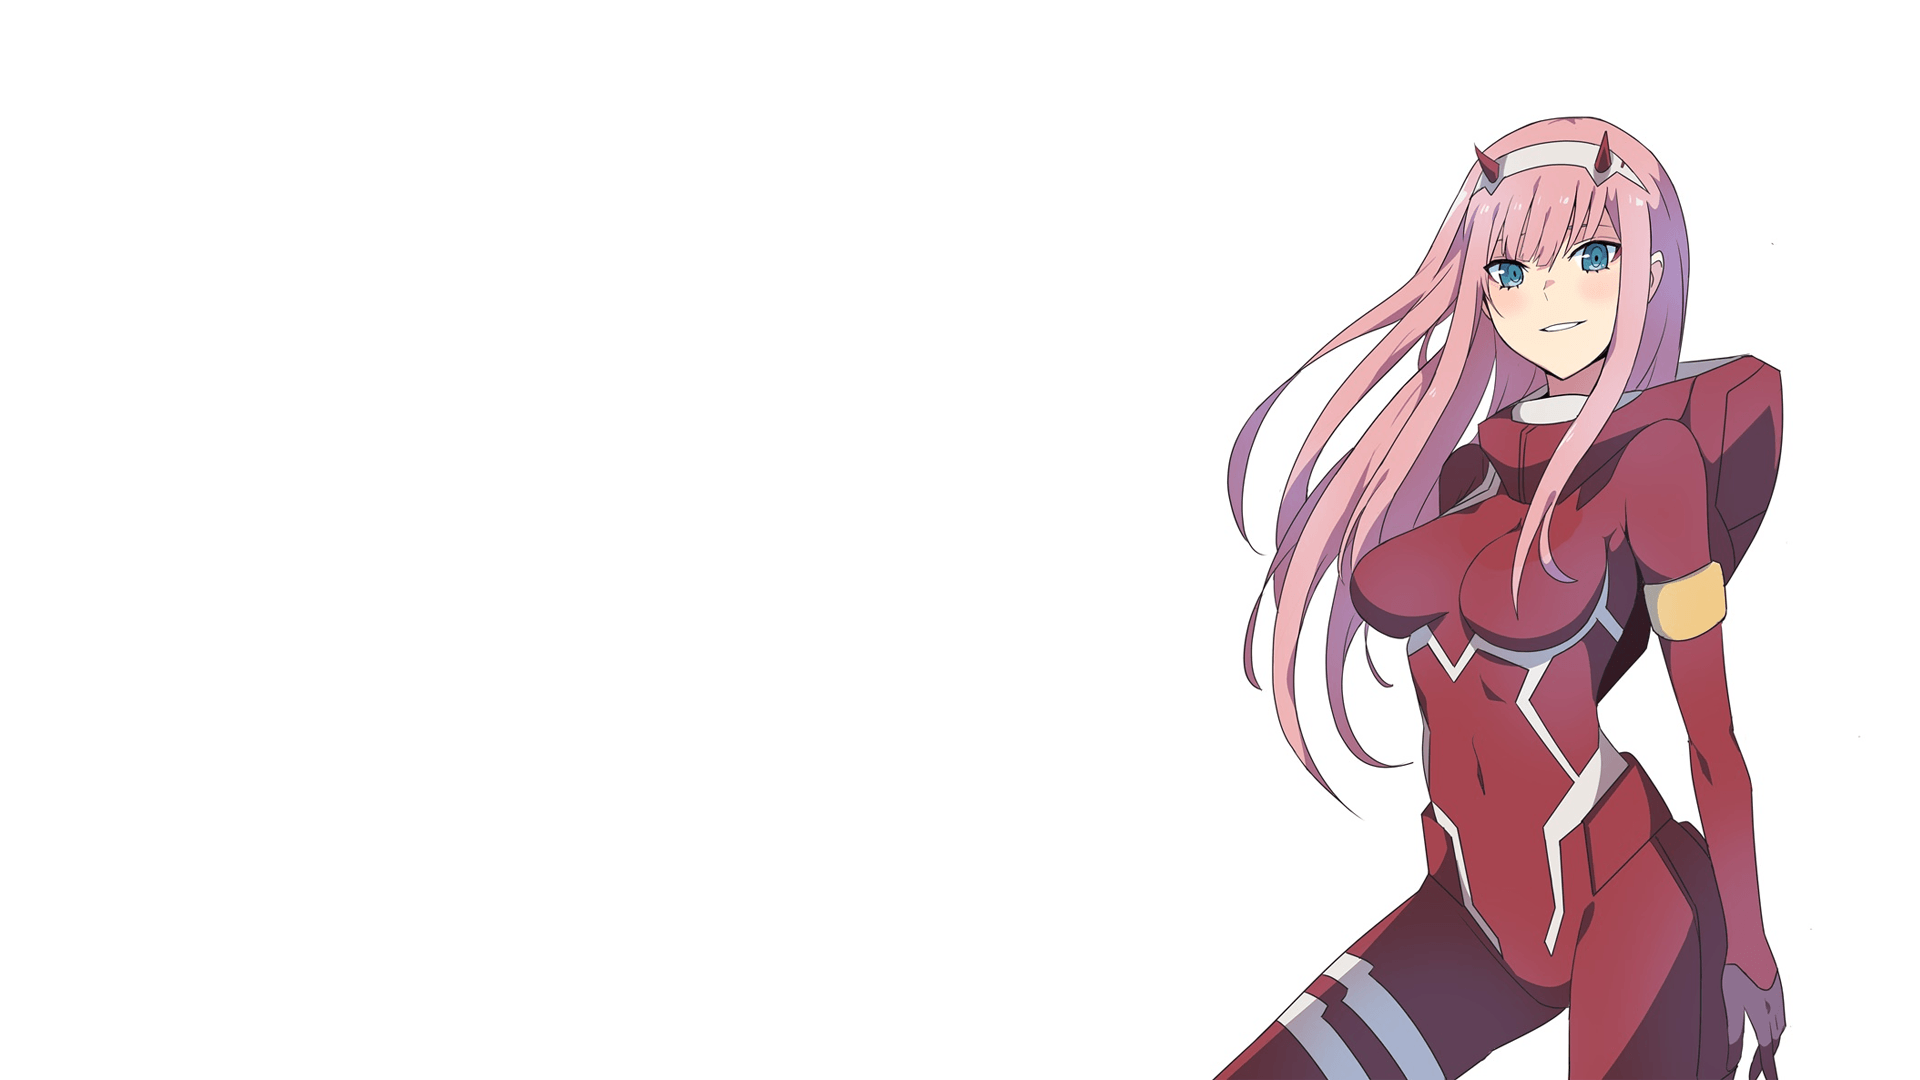 Zero Two (Darling in the FranXX) 1920x1080 Wallpaper (from the previous fanart dump)